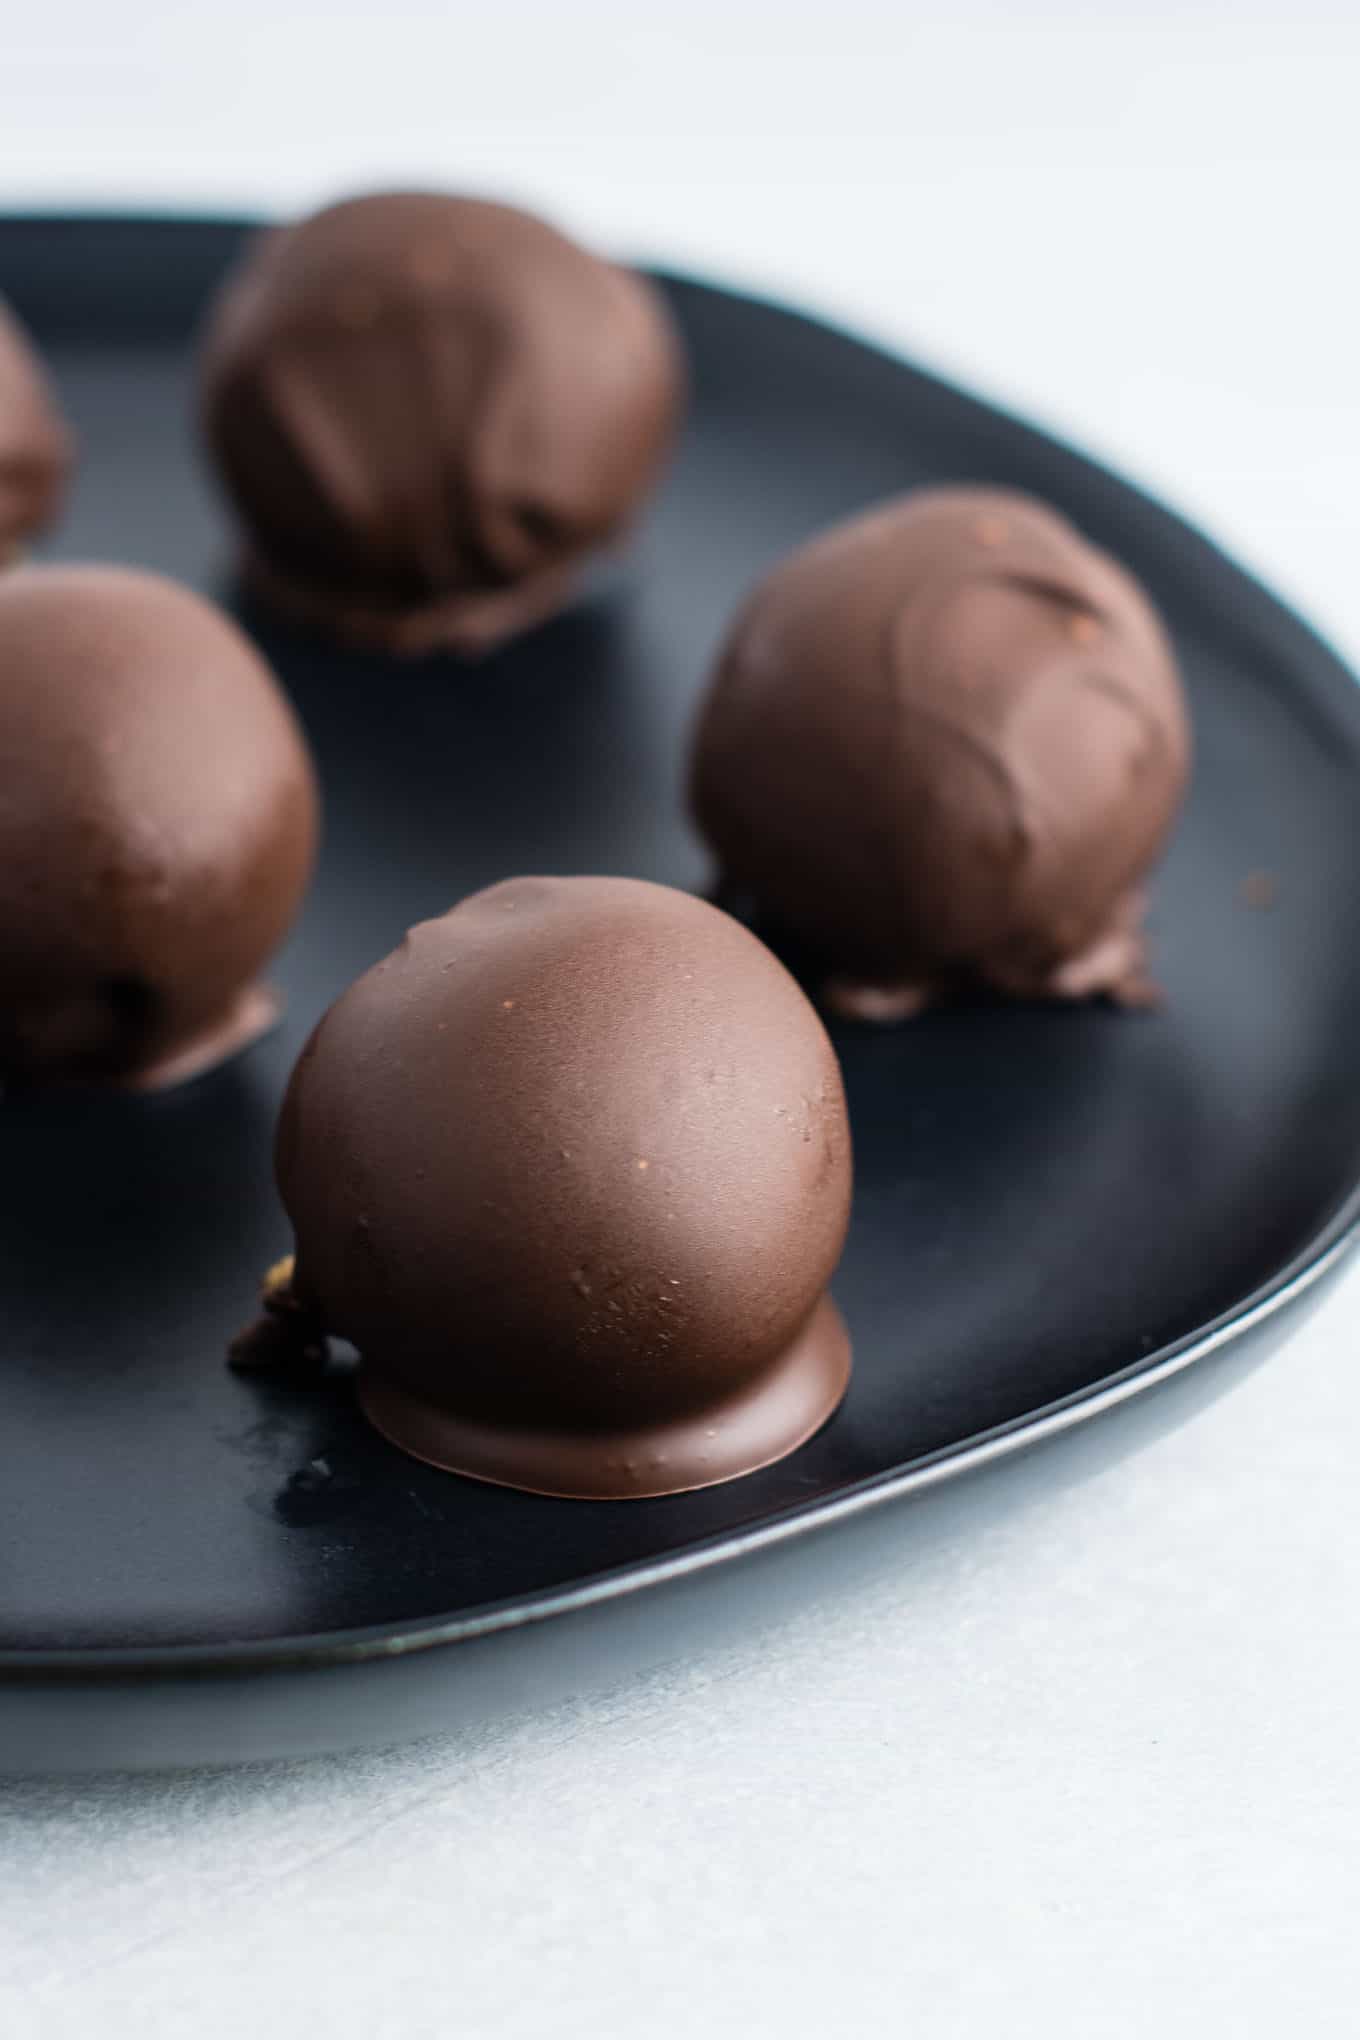 Healthy No Bake Peanut Butter Truffles recipe made with all vegan and gluten free ingredients. A healthier alternative without sacrificing flavor! NO ONE will guess this is a healthy recipe! #vegan #glutenfree #peanutbutter #nobake #dessert